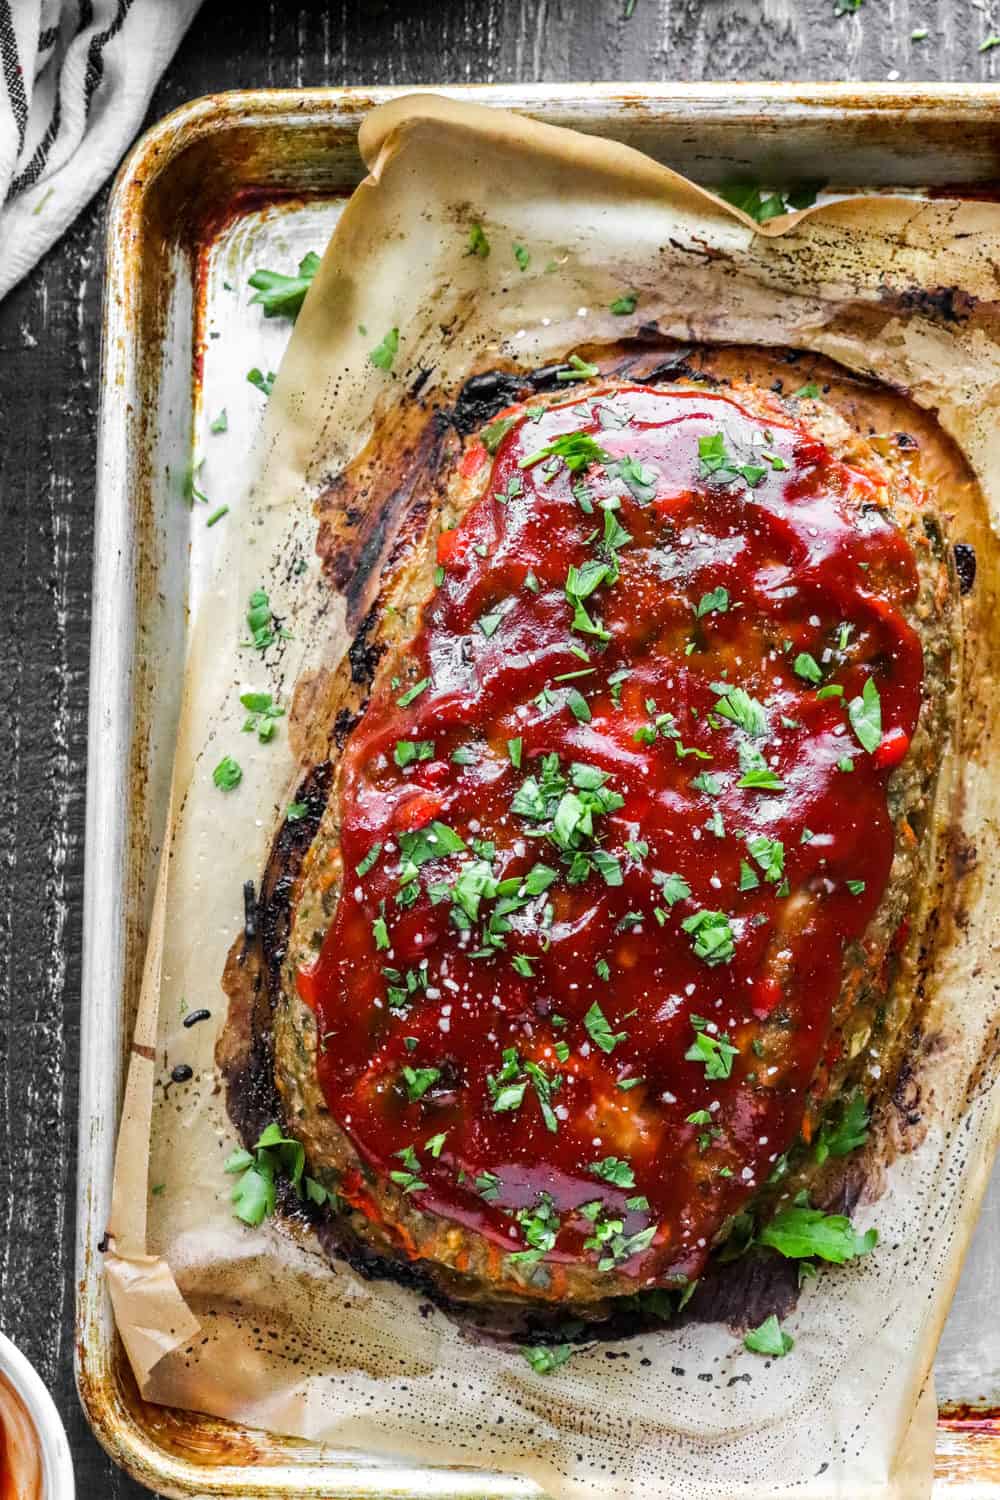 Whole baked meatloaf topped with red sauce and herbs on a baking sheet